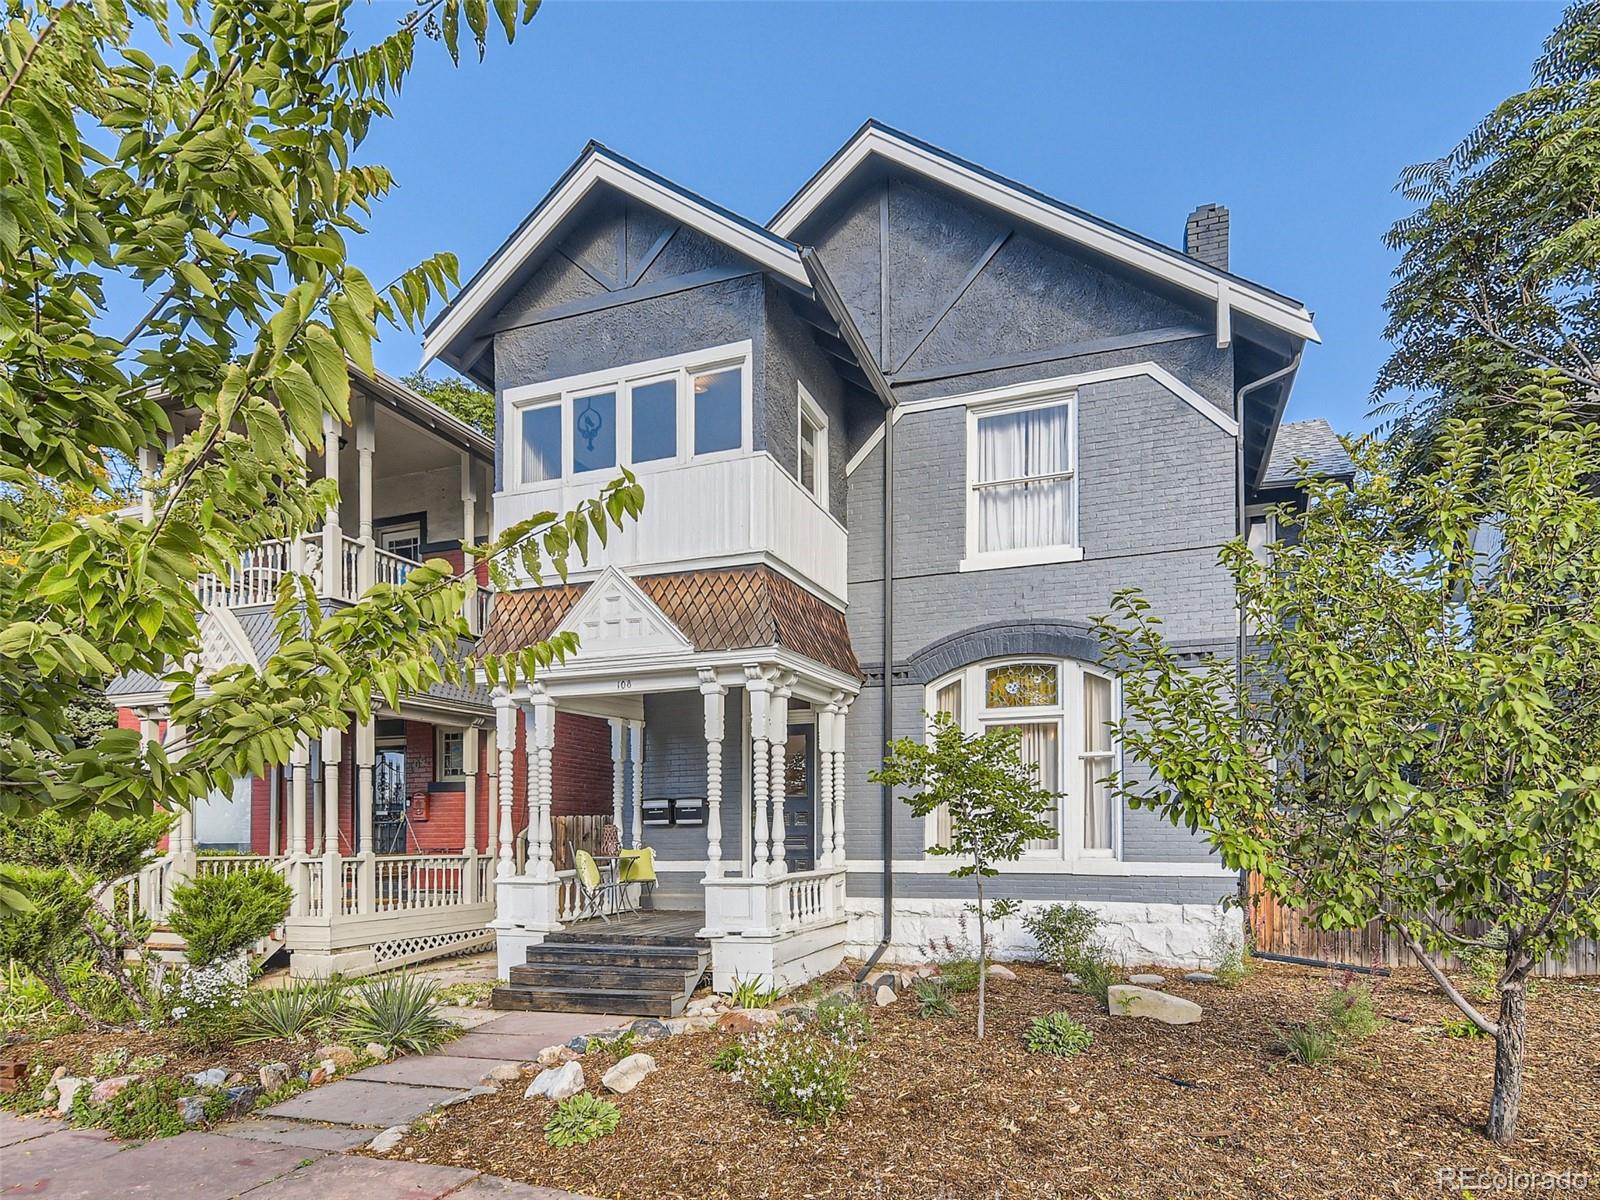 108 s lincoln street, denver sold home. Closed on 2024-04-23 for $1,205,000.